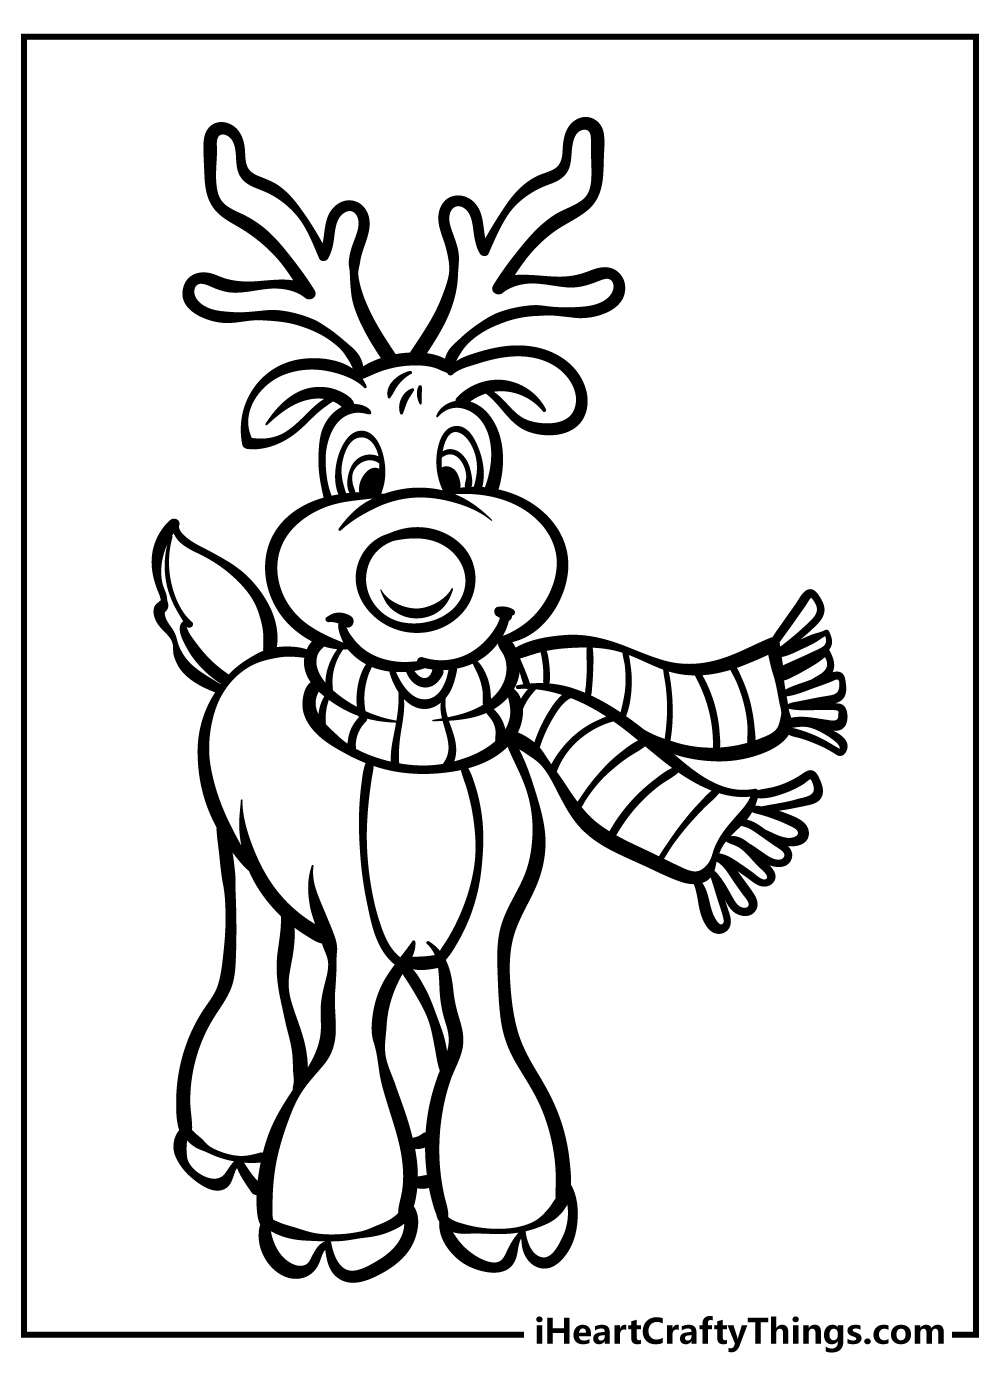 Rudolph Coloring Book for adults free download